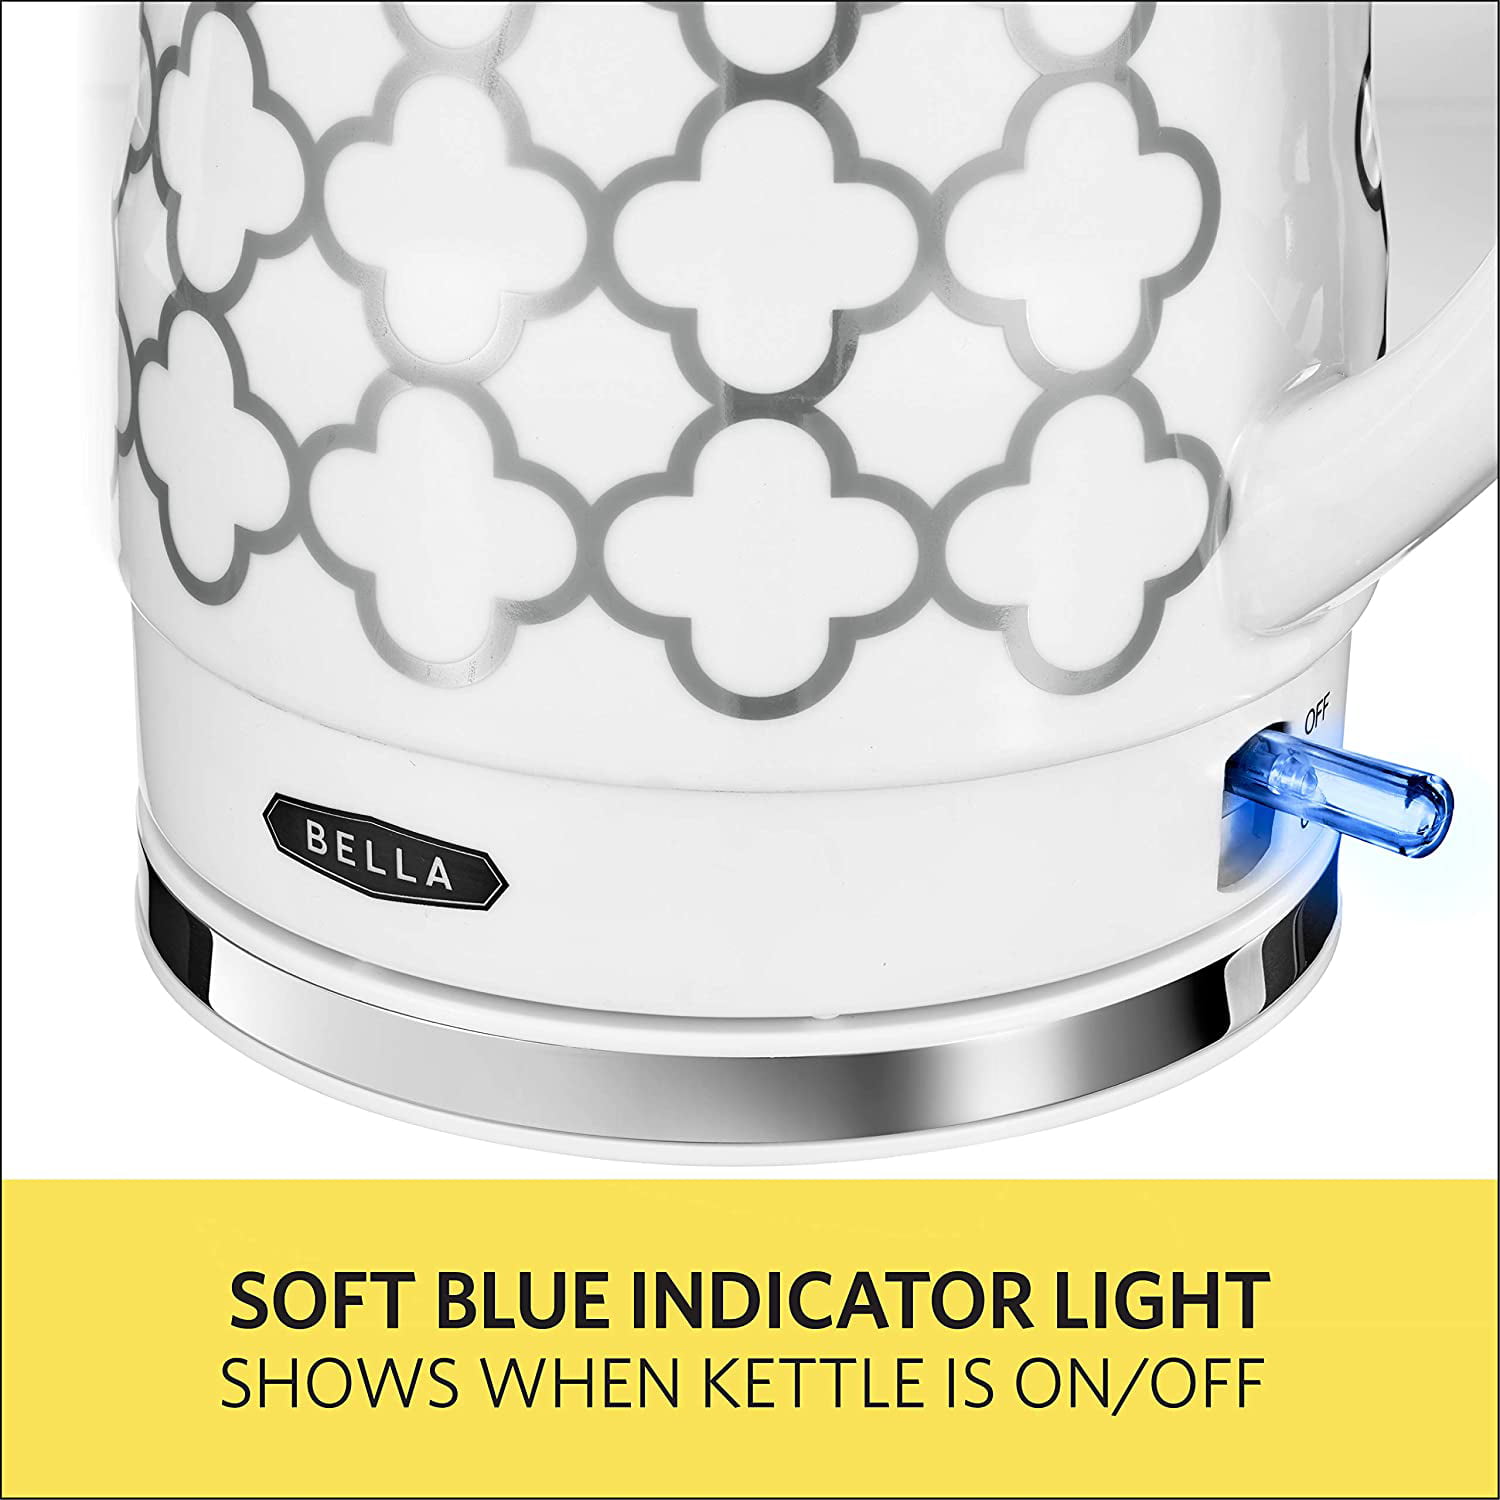  BELLA Electric Kettle & Tea Pot - Ceramic Water Heater with  Detachable Swivel Base, Auto Shut Off & Boil Dry Protection, 1.2 Liter,  Silver Tile Pattern: Home & Kitchen